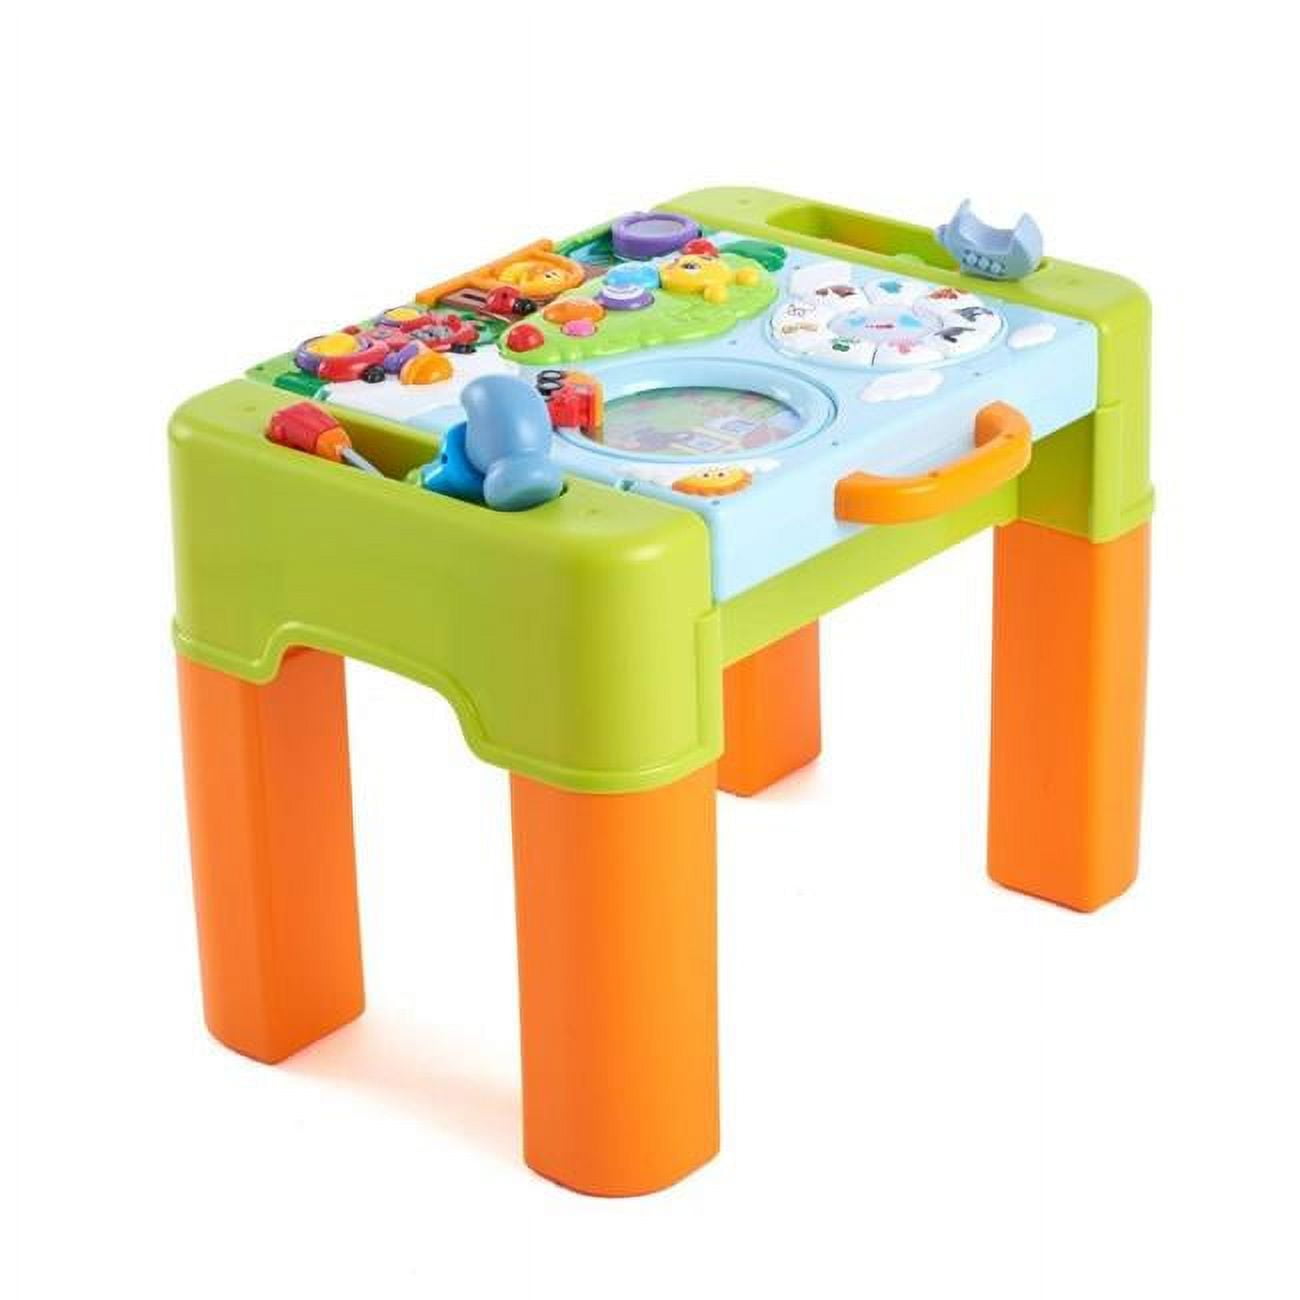 Ps928 Play & Learning Activity Desk 6 In 1 Game Table Activity Desk